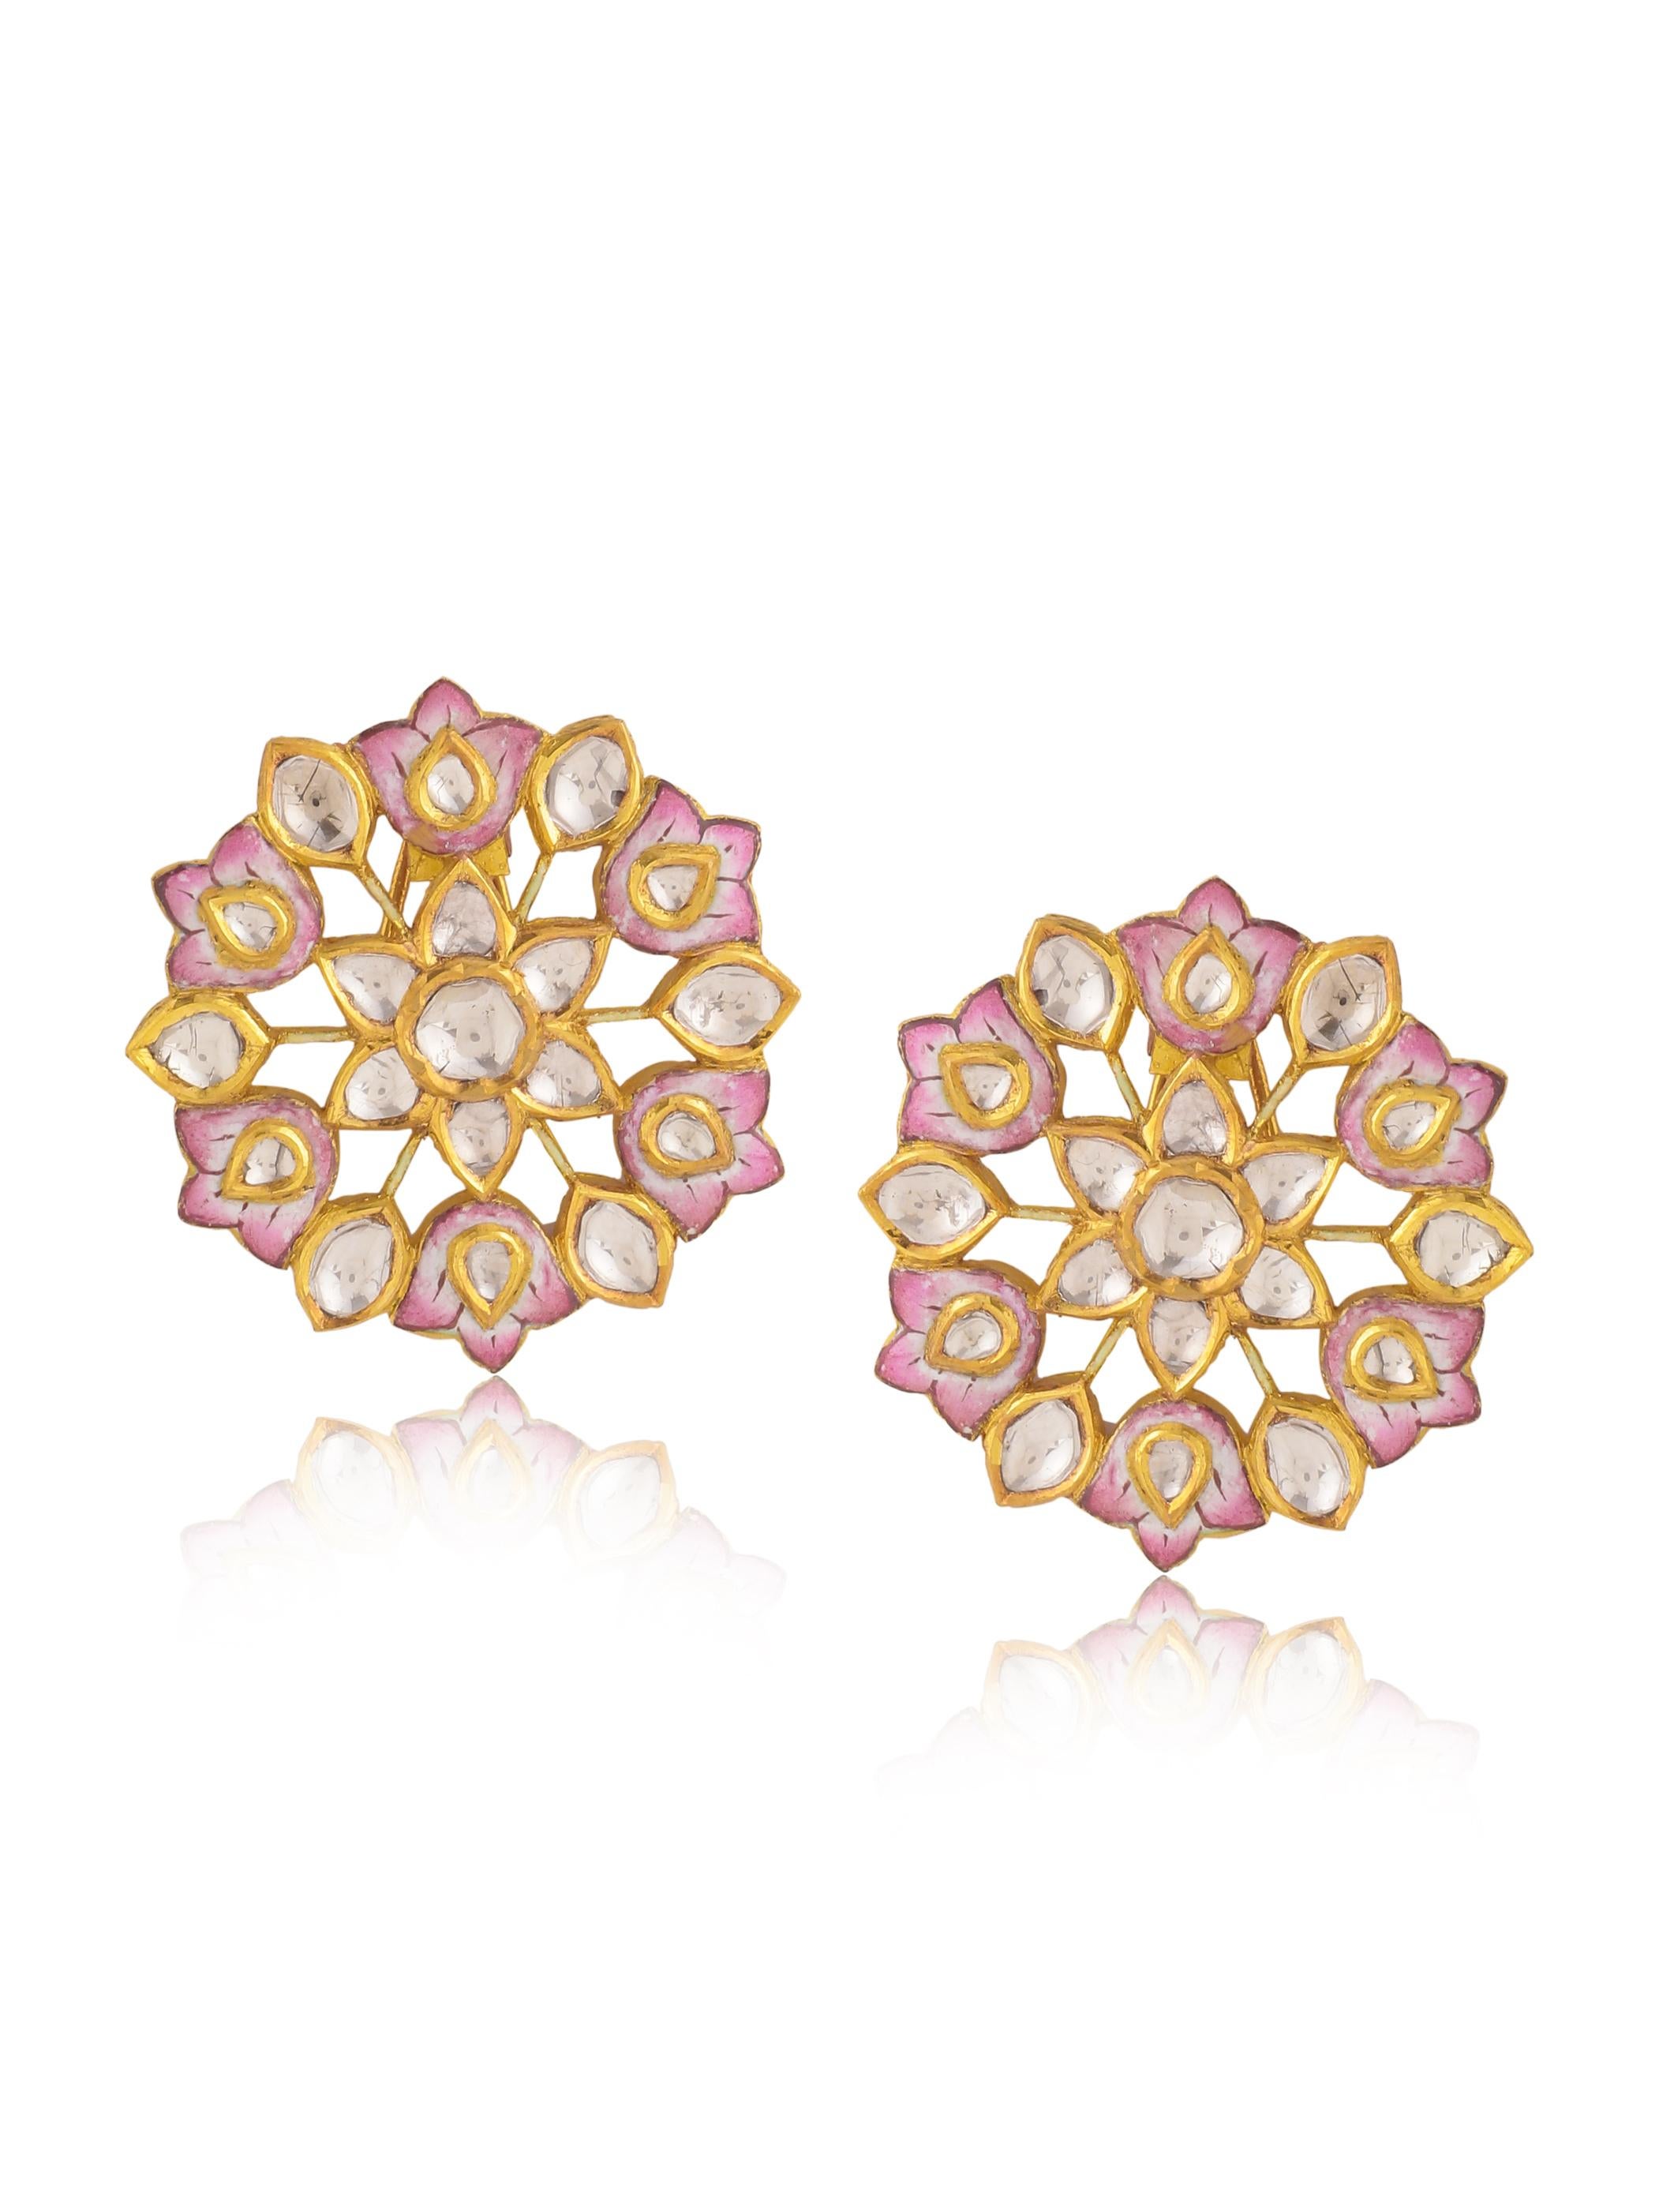 Rose Cut Diamond and Enamel Floral Stud Earring Pair Handcrafted in 18 Karat Gold For Sale